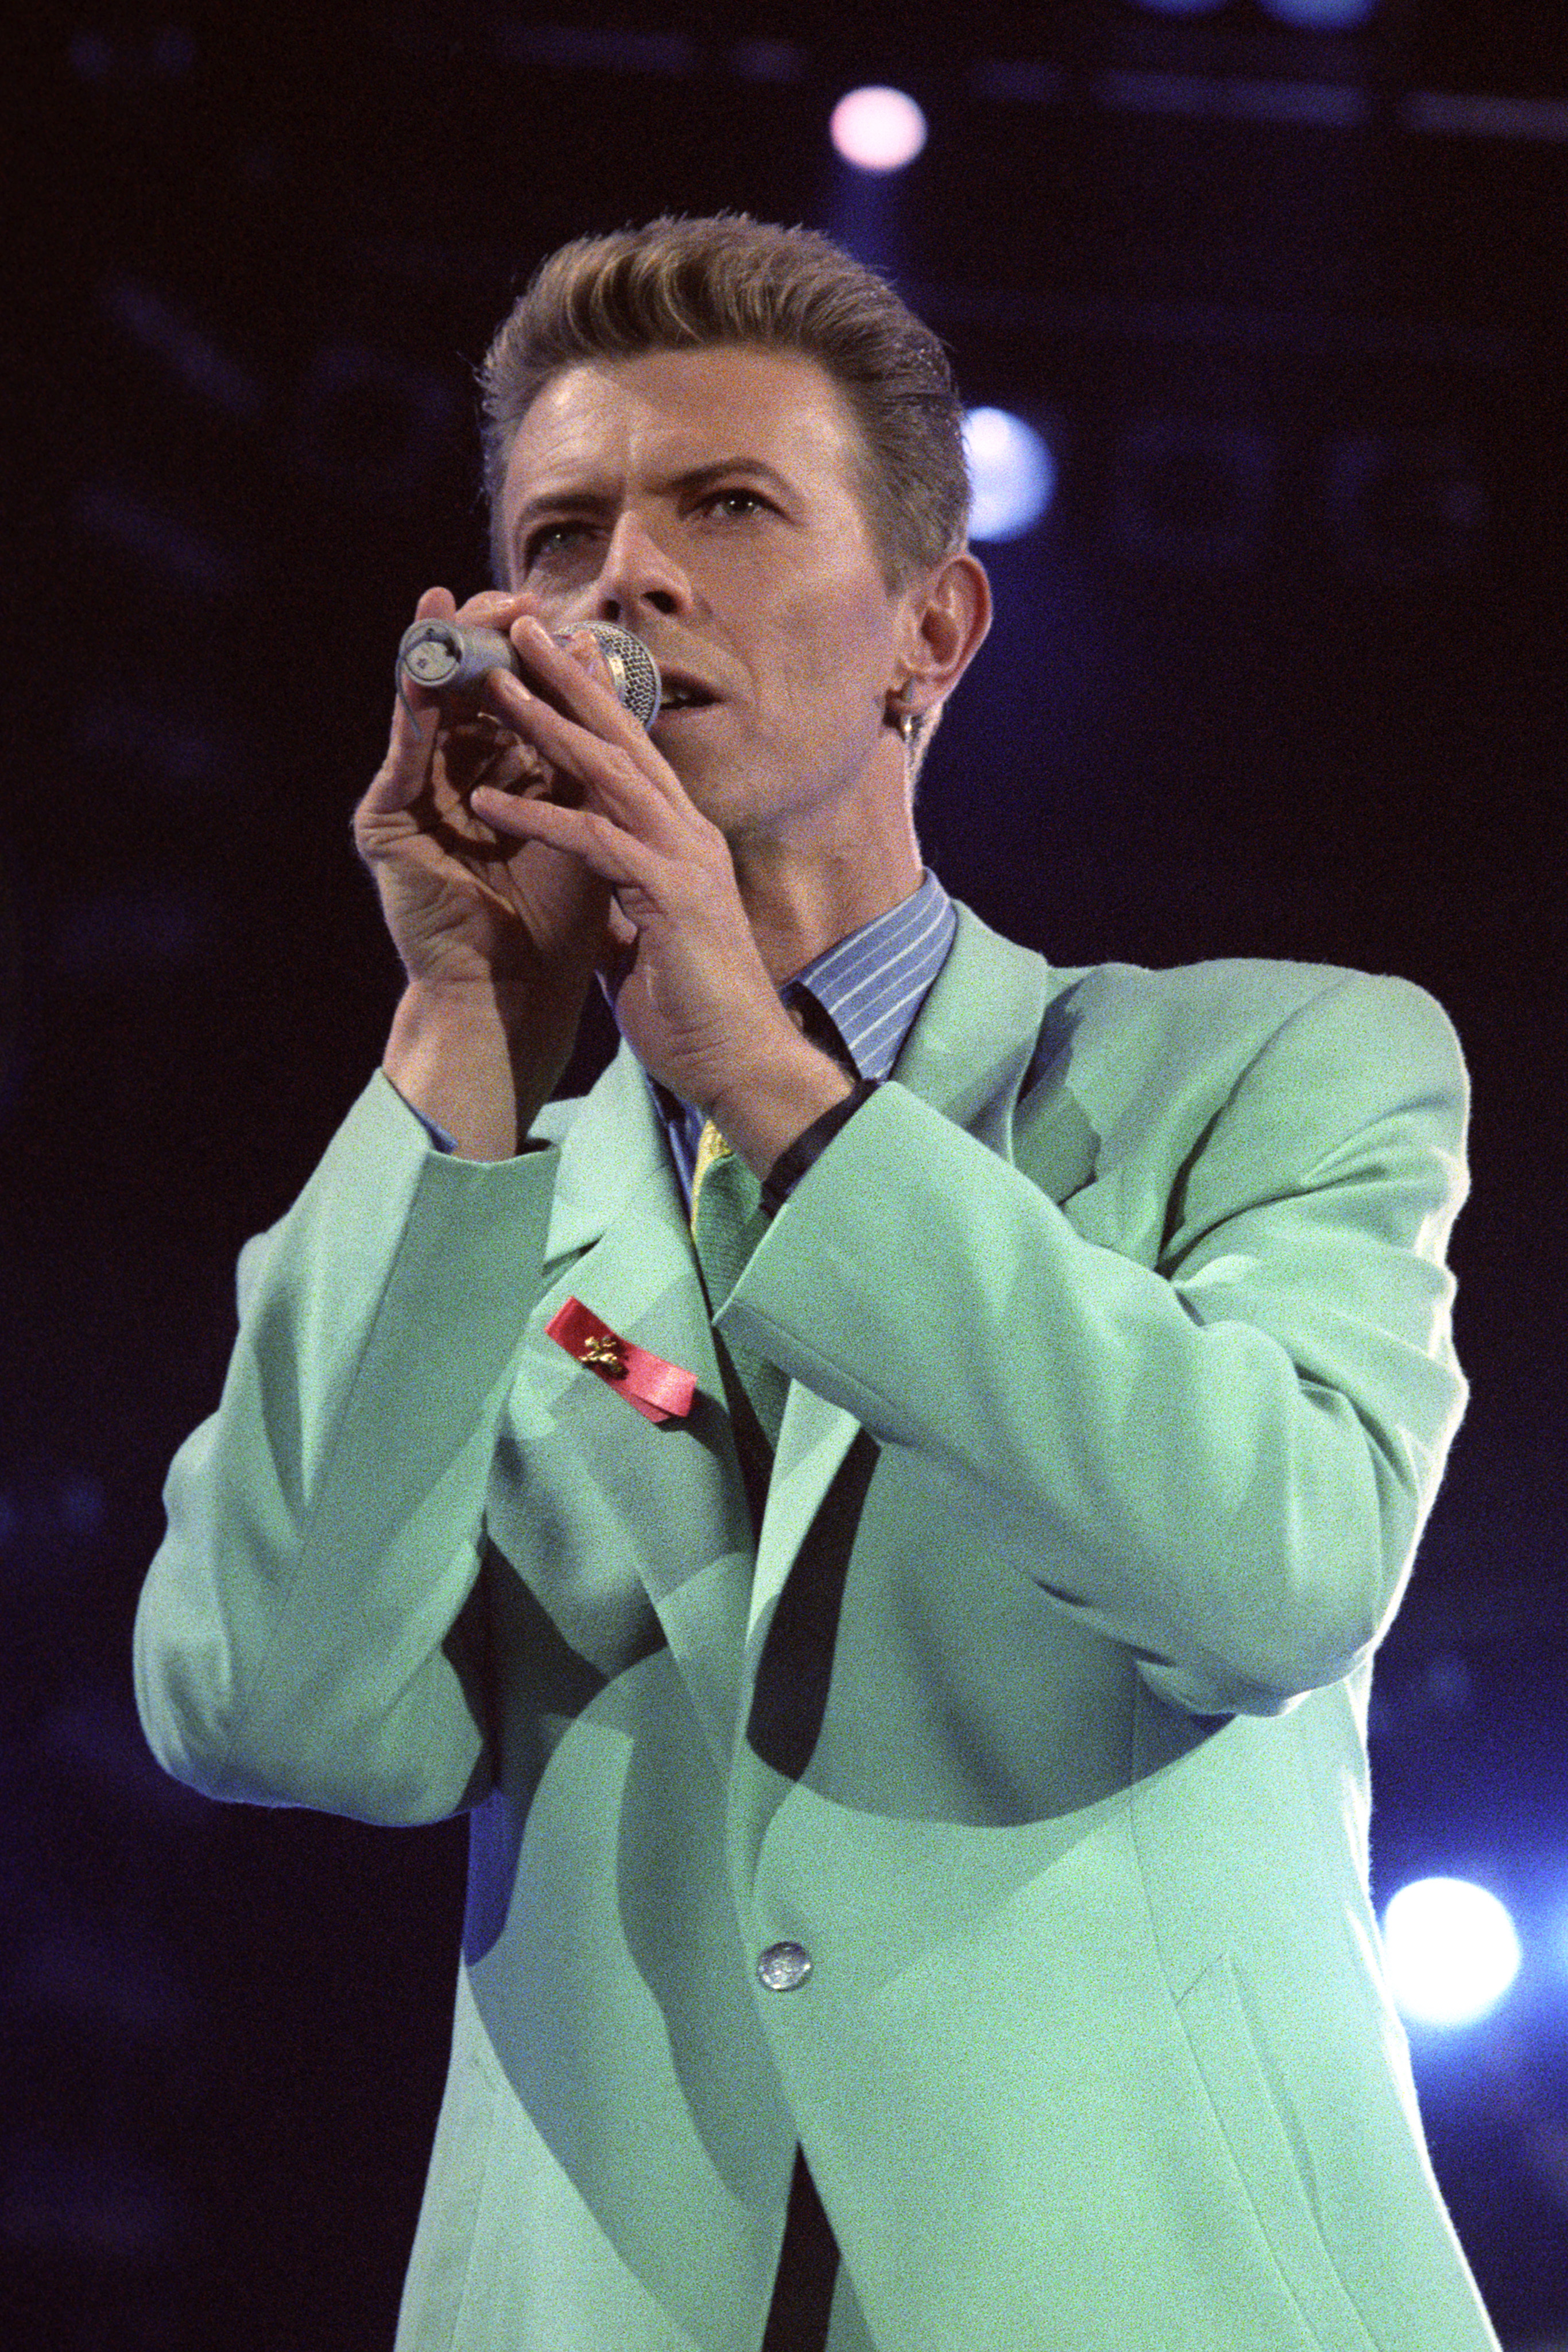 Bowie onstage in 1992